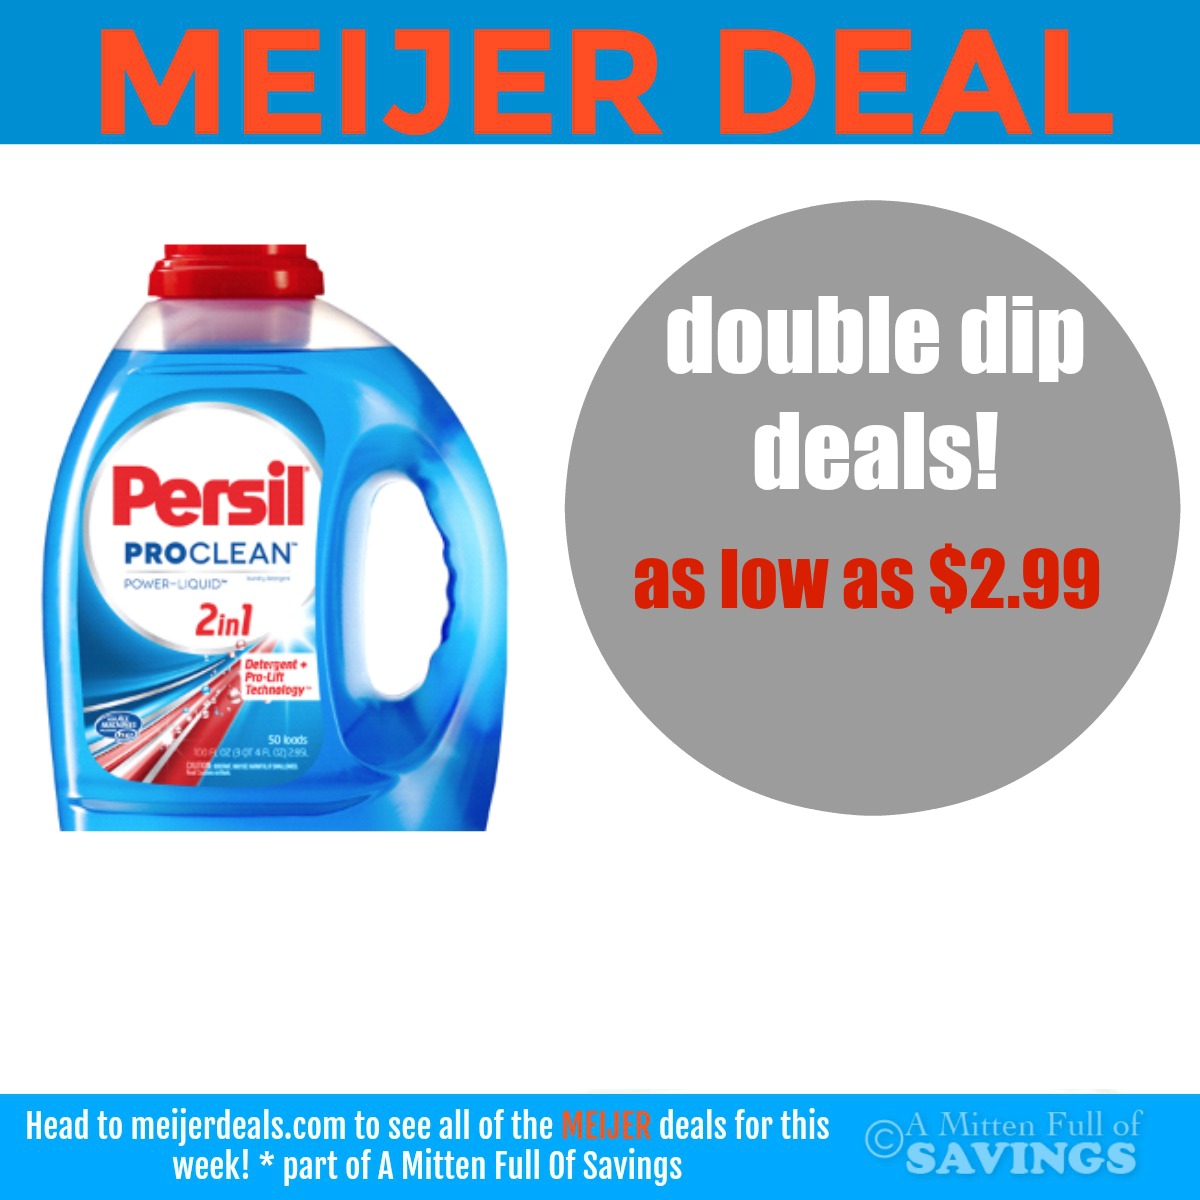 Persil Double Dip deals at Meijer